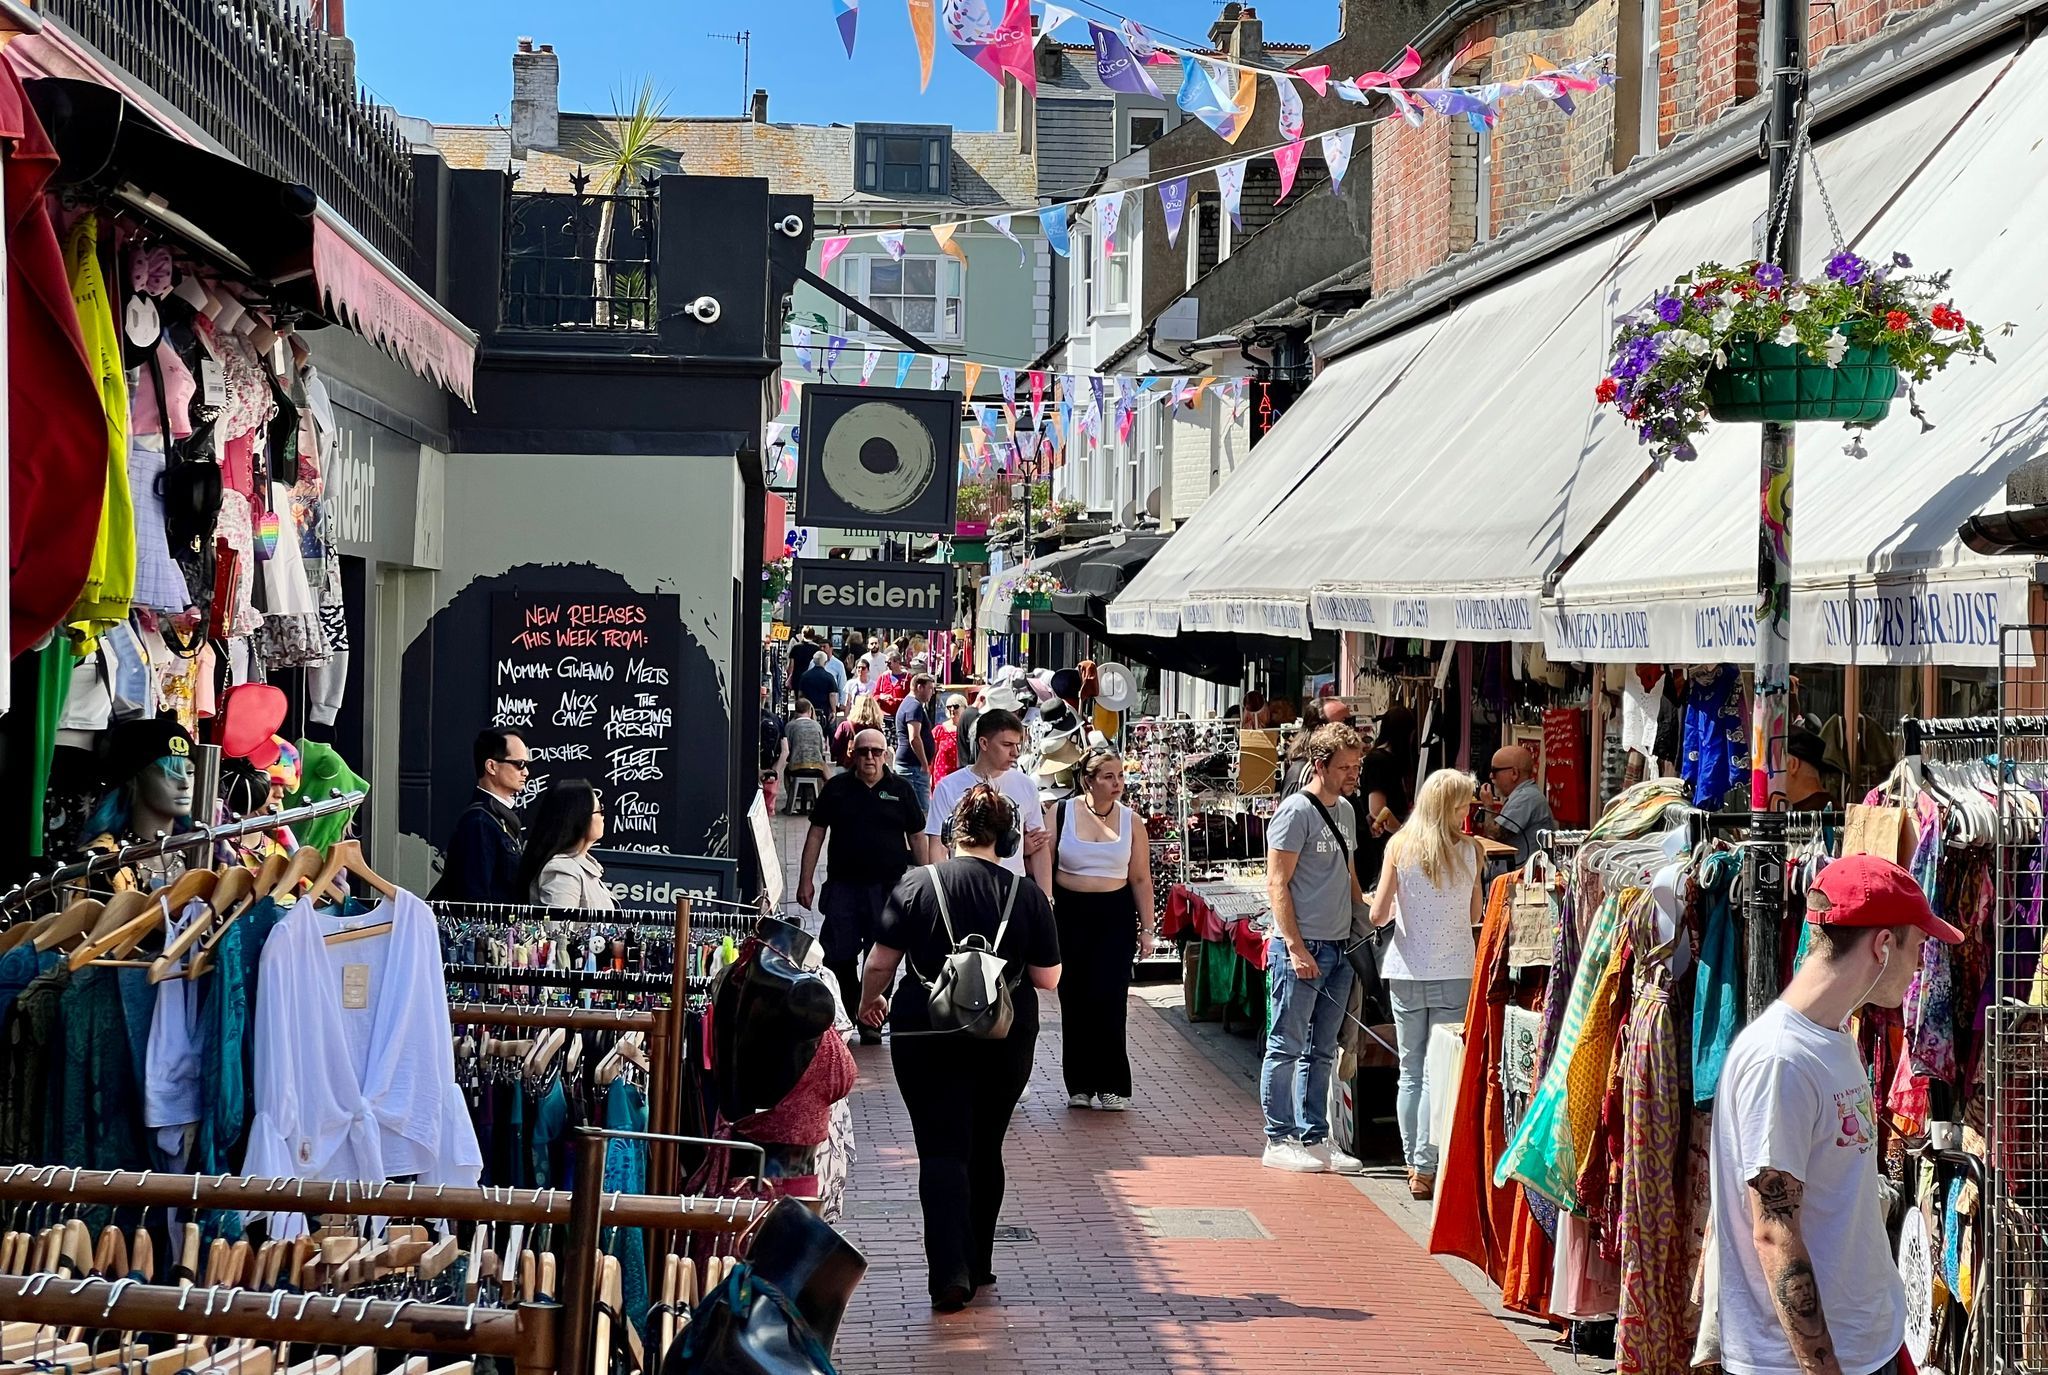 lovely shot of the North Laine, people walking on the street and looking at different shops. Brighton Holiday